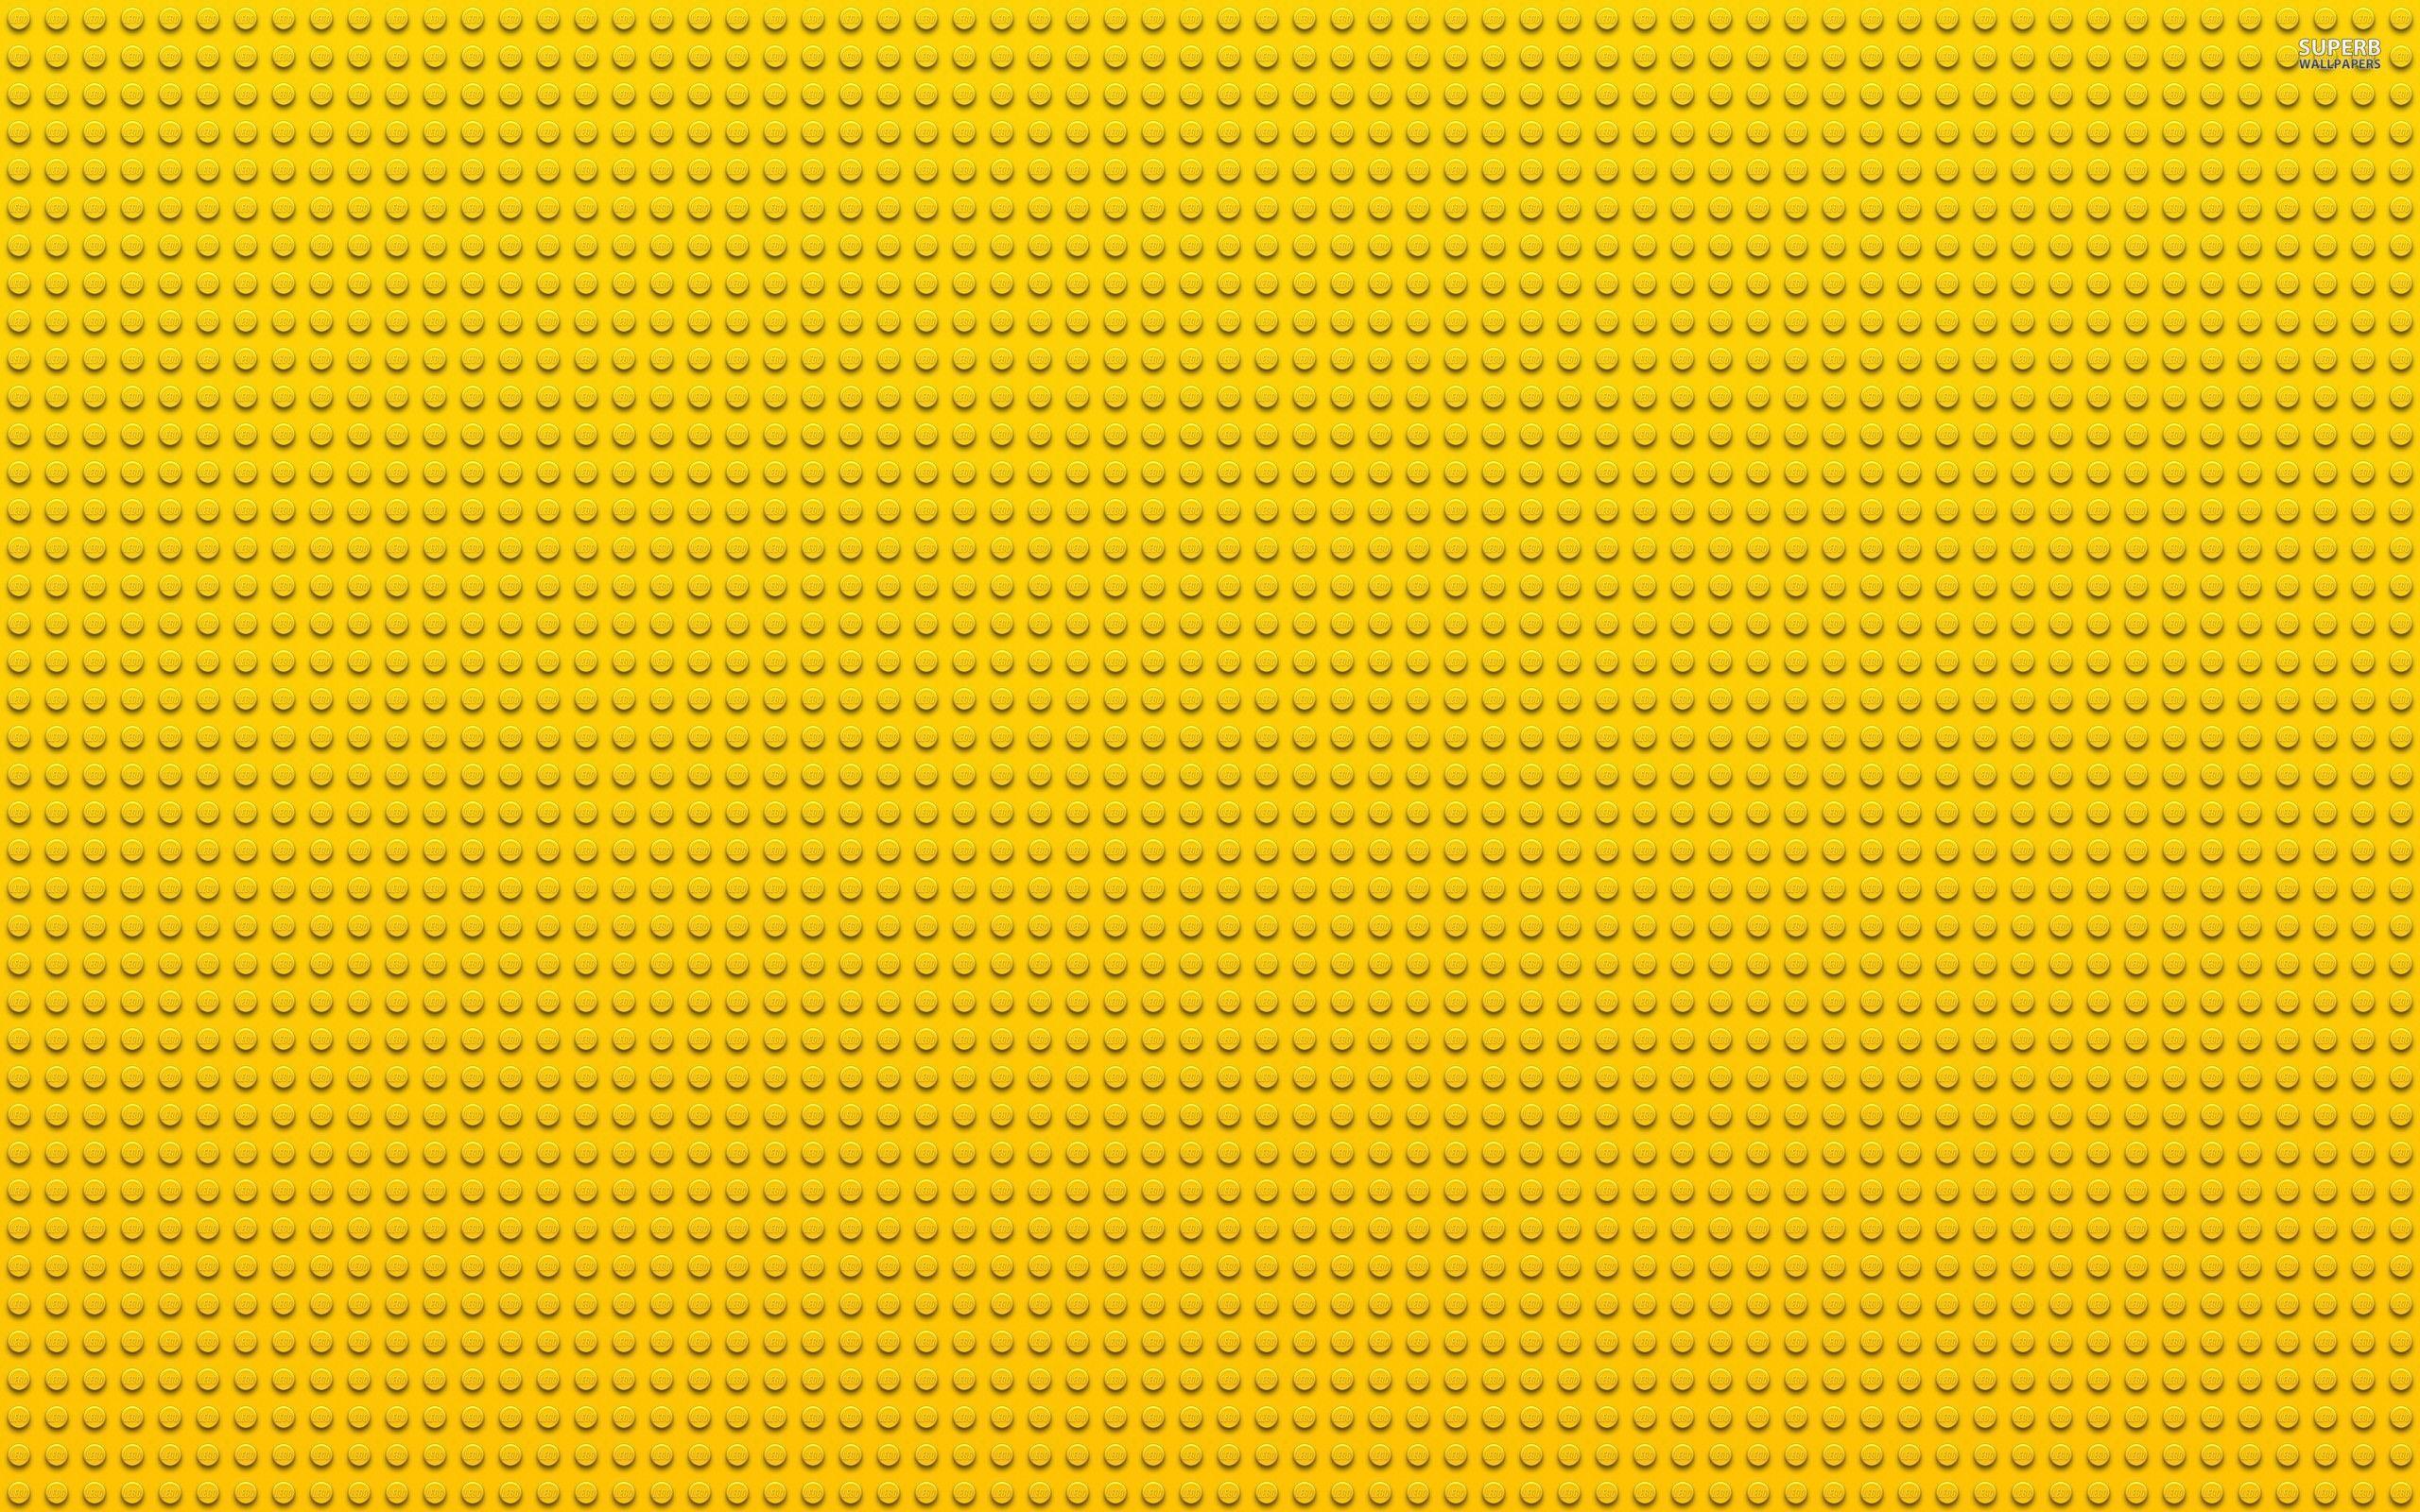 lego yellow bricks: color inspiration. The Lego logo is red